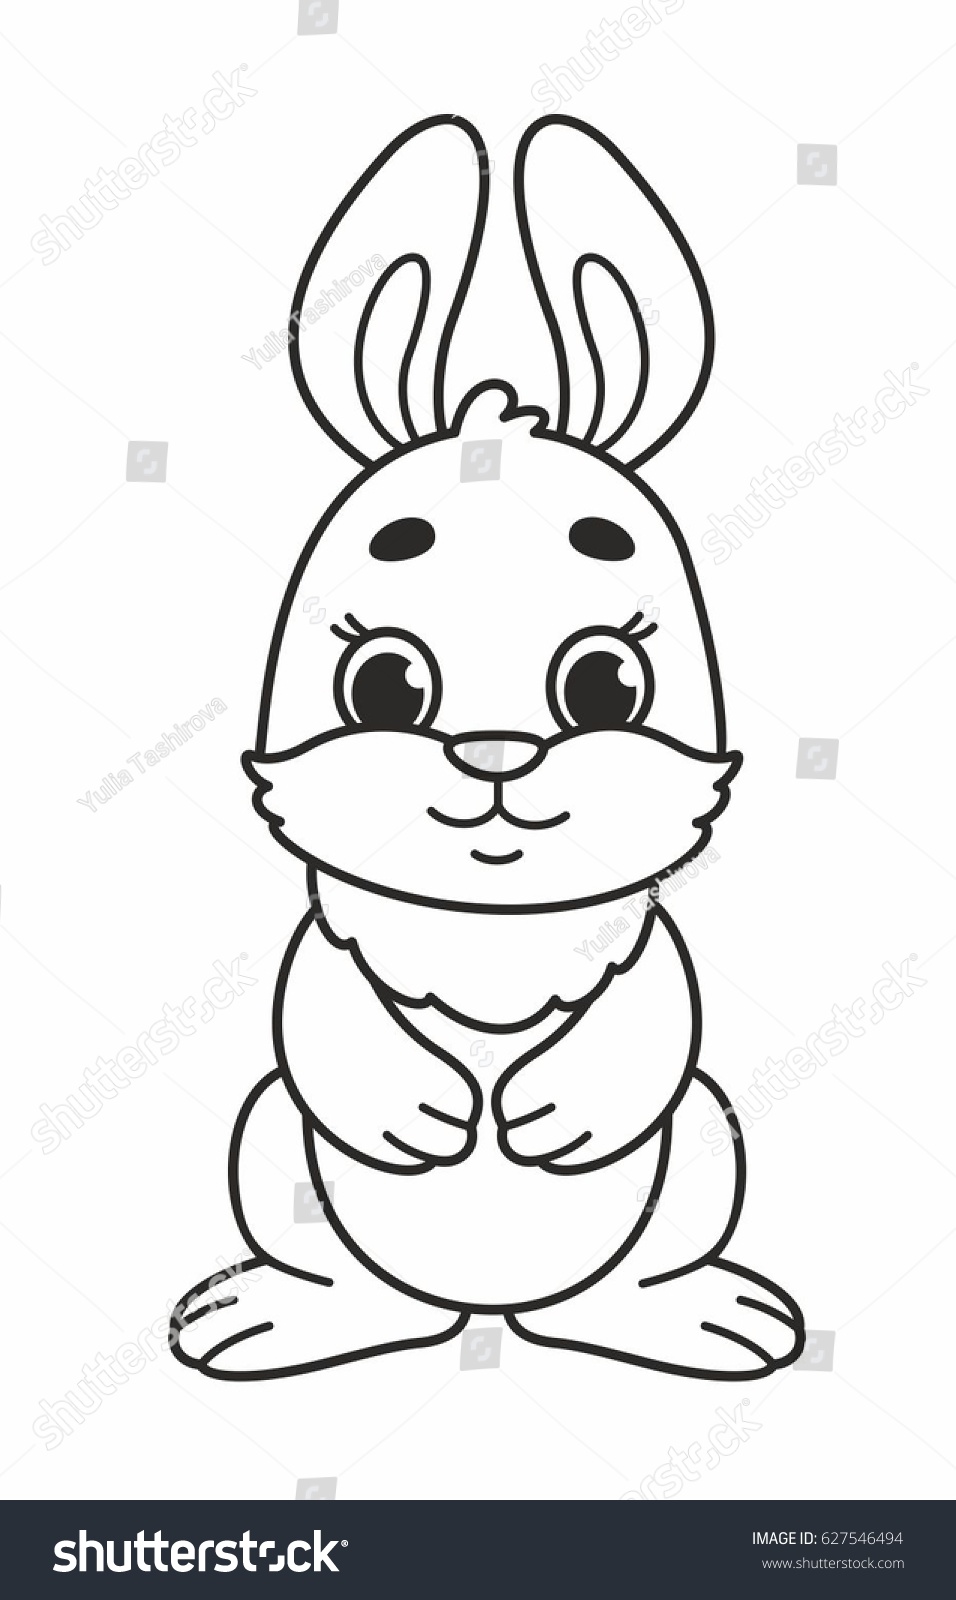 Cute Bunny Clipart Black And White.